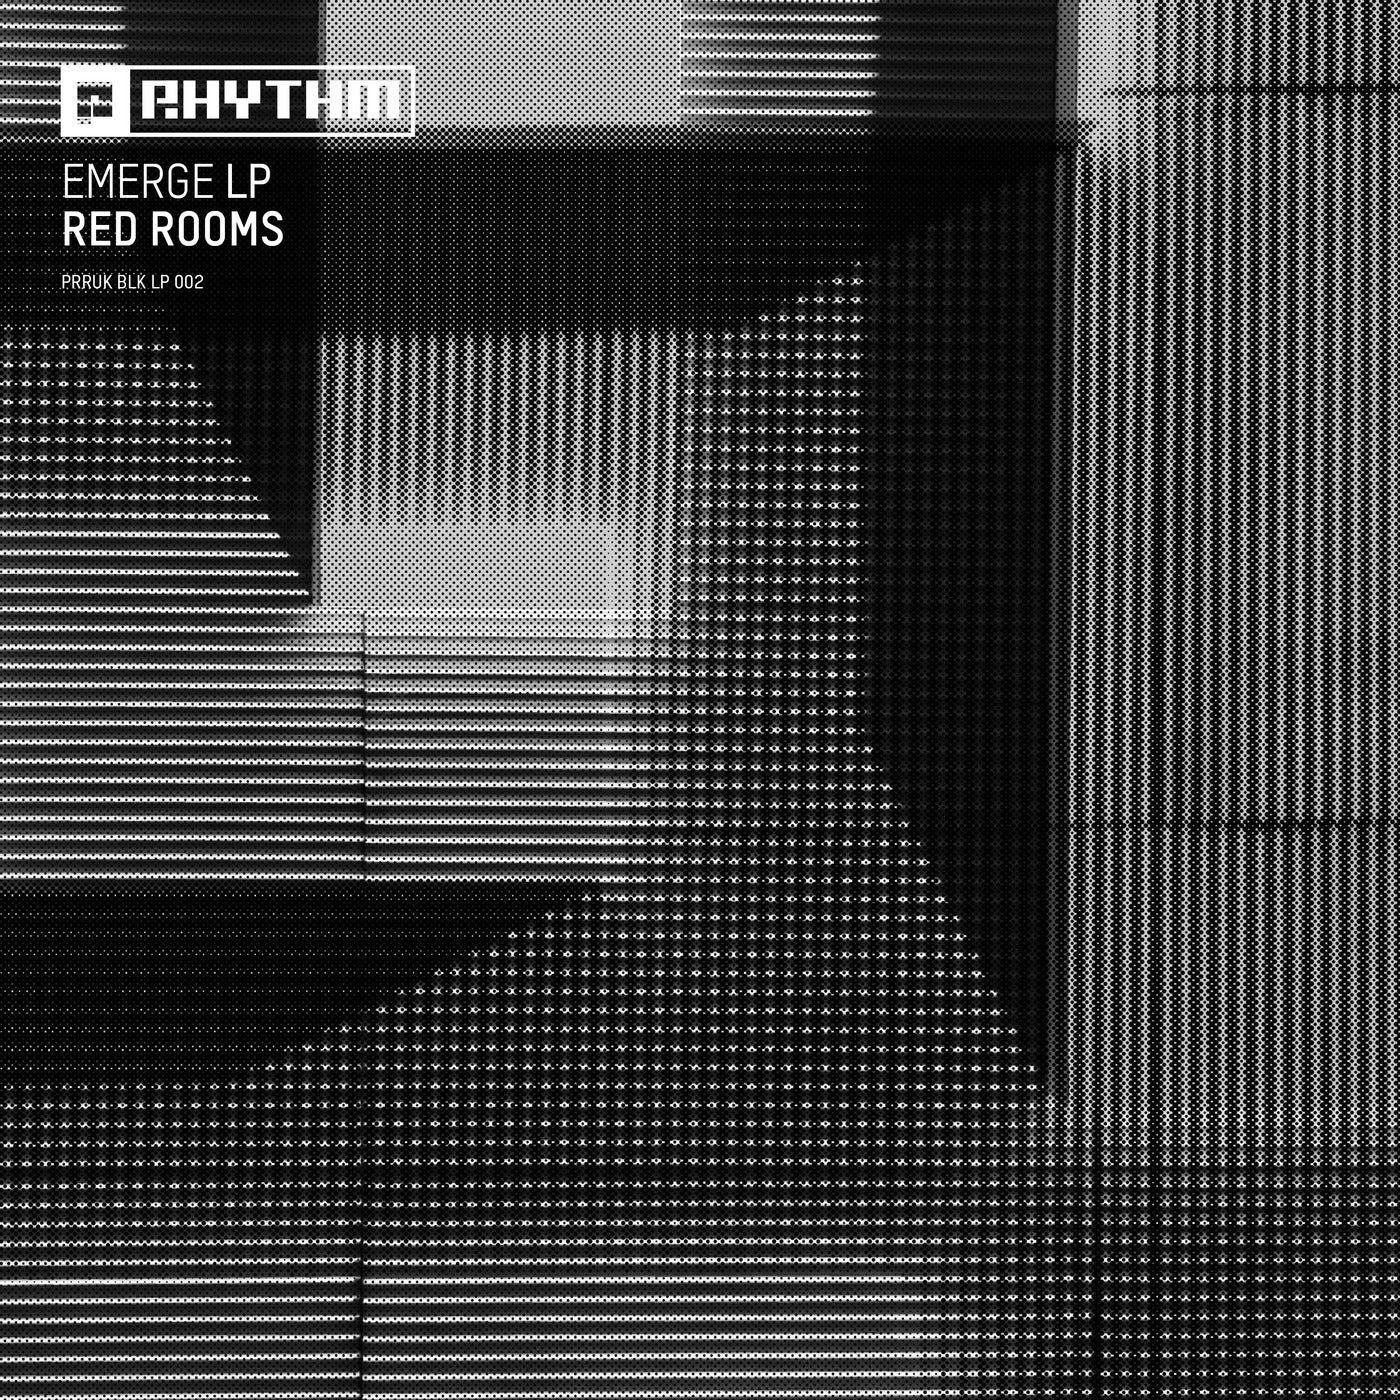 image cover: Red Rooms - Emerge LP on Planet Rhythm